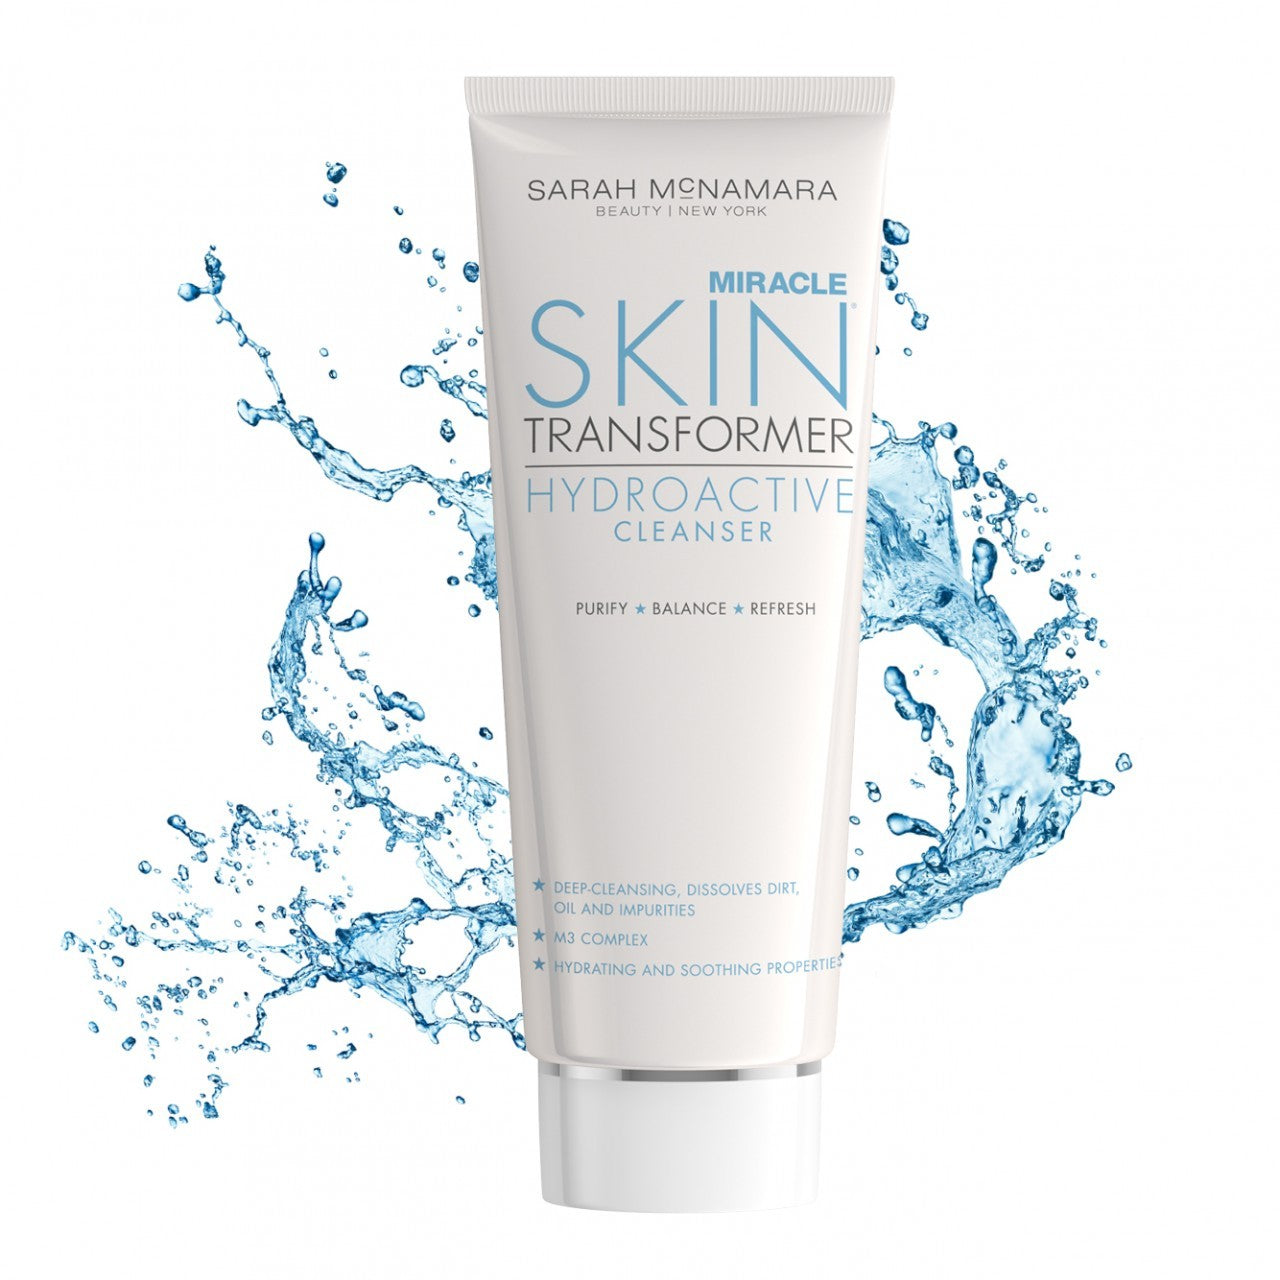 Miracle Skin Transformer Hydroactive Cleanser 3.3oz